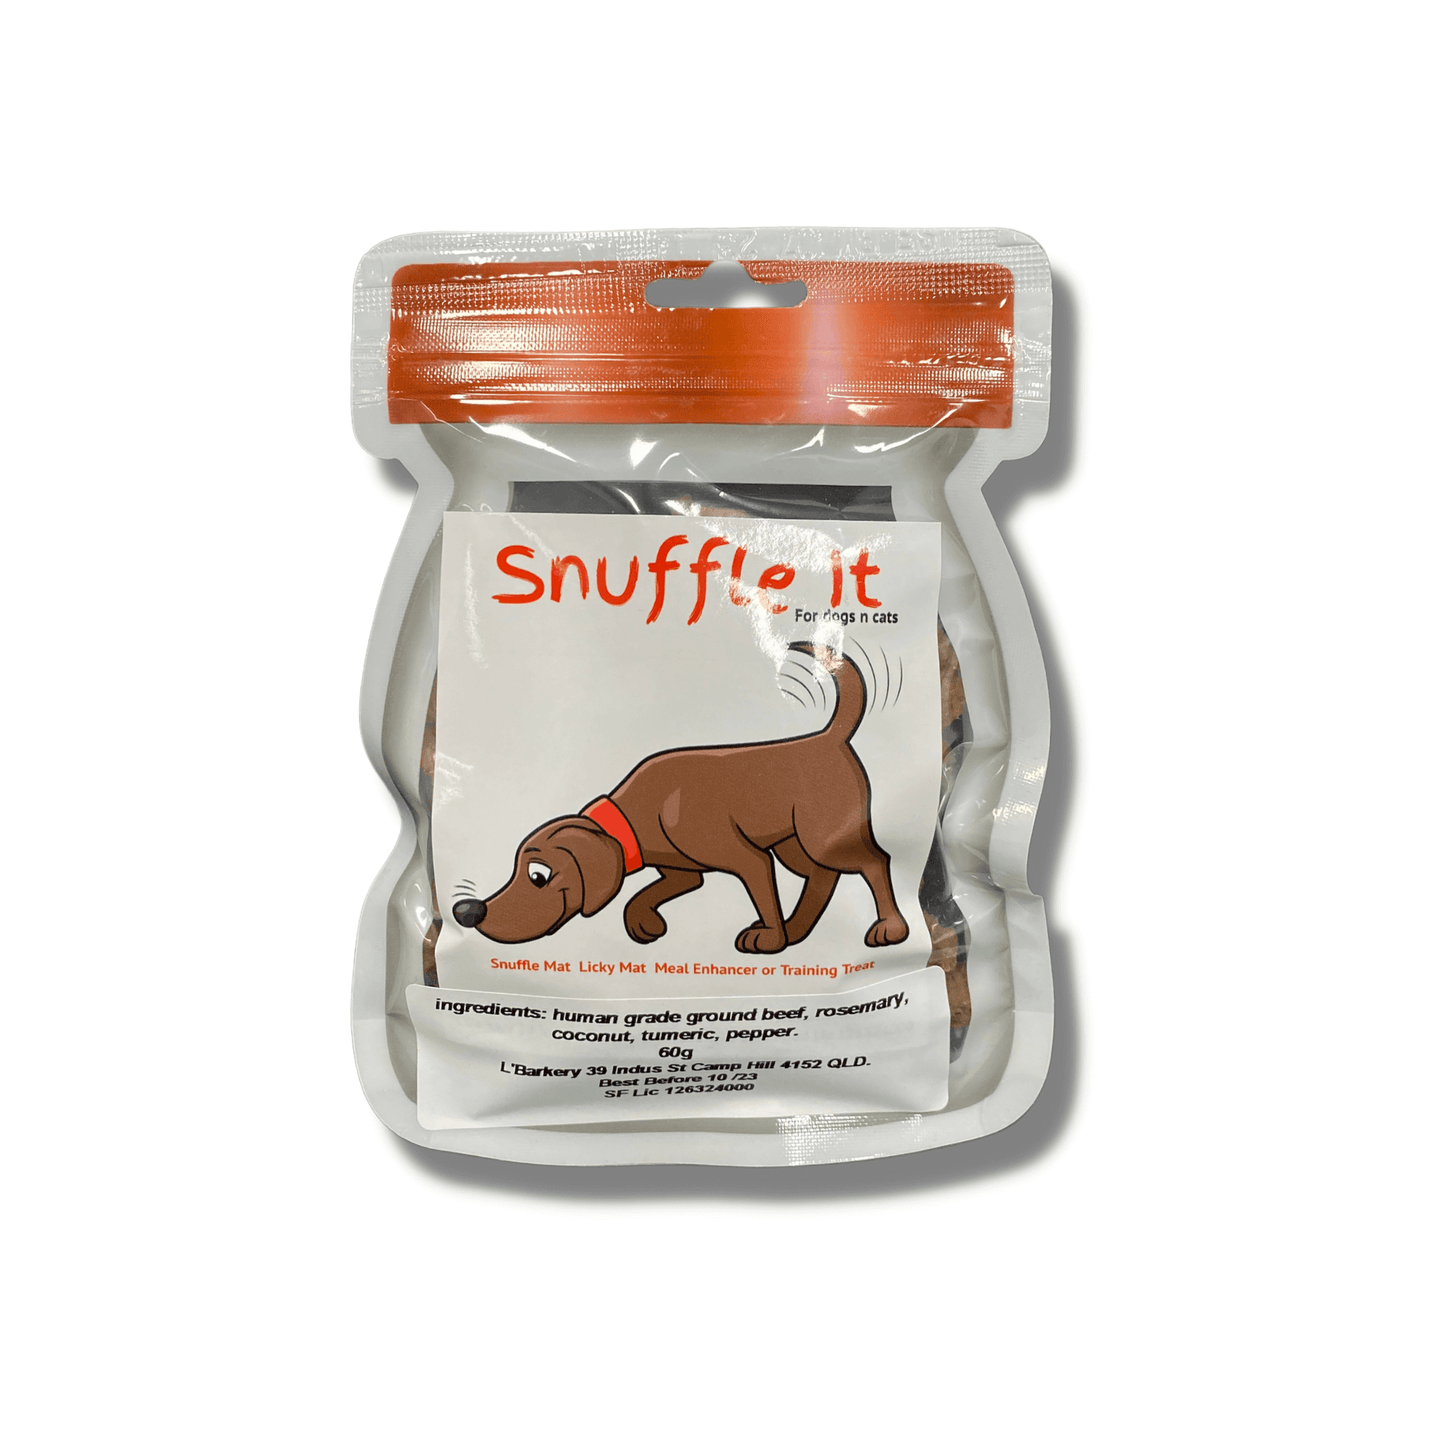 Beef mix snuffle mat mix, let's pawty